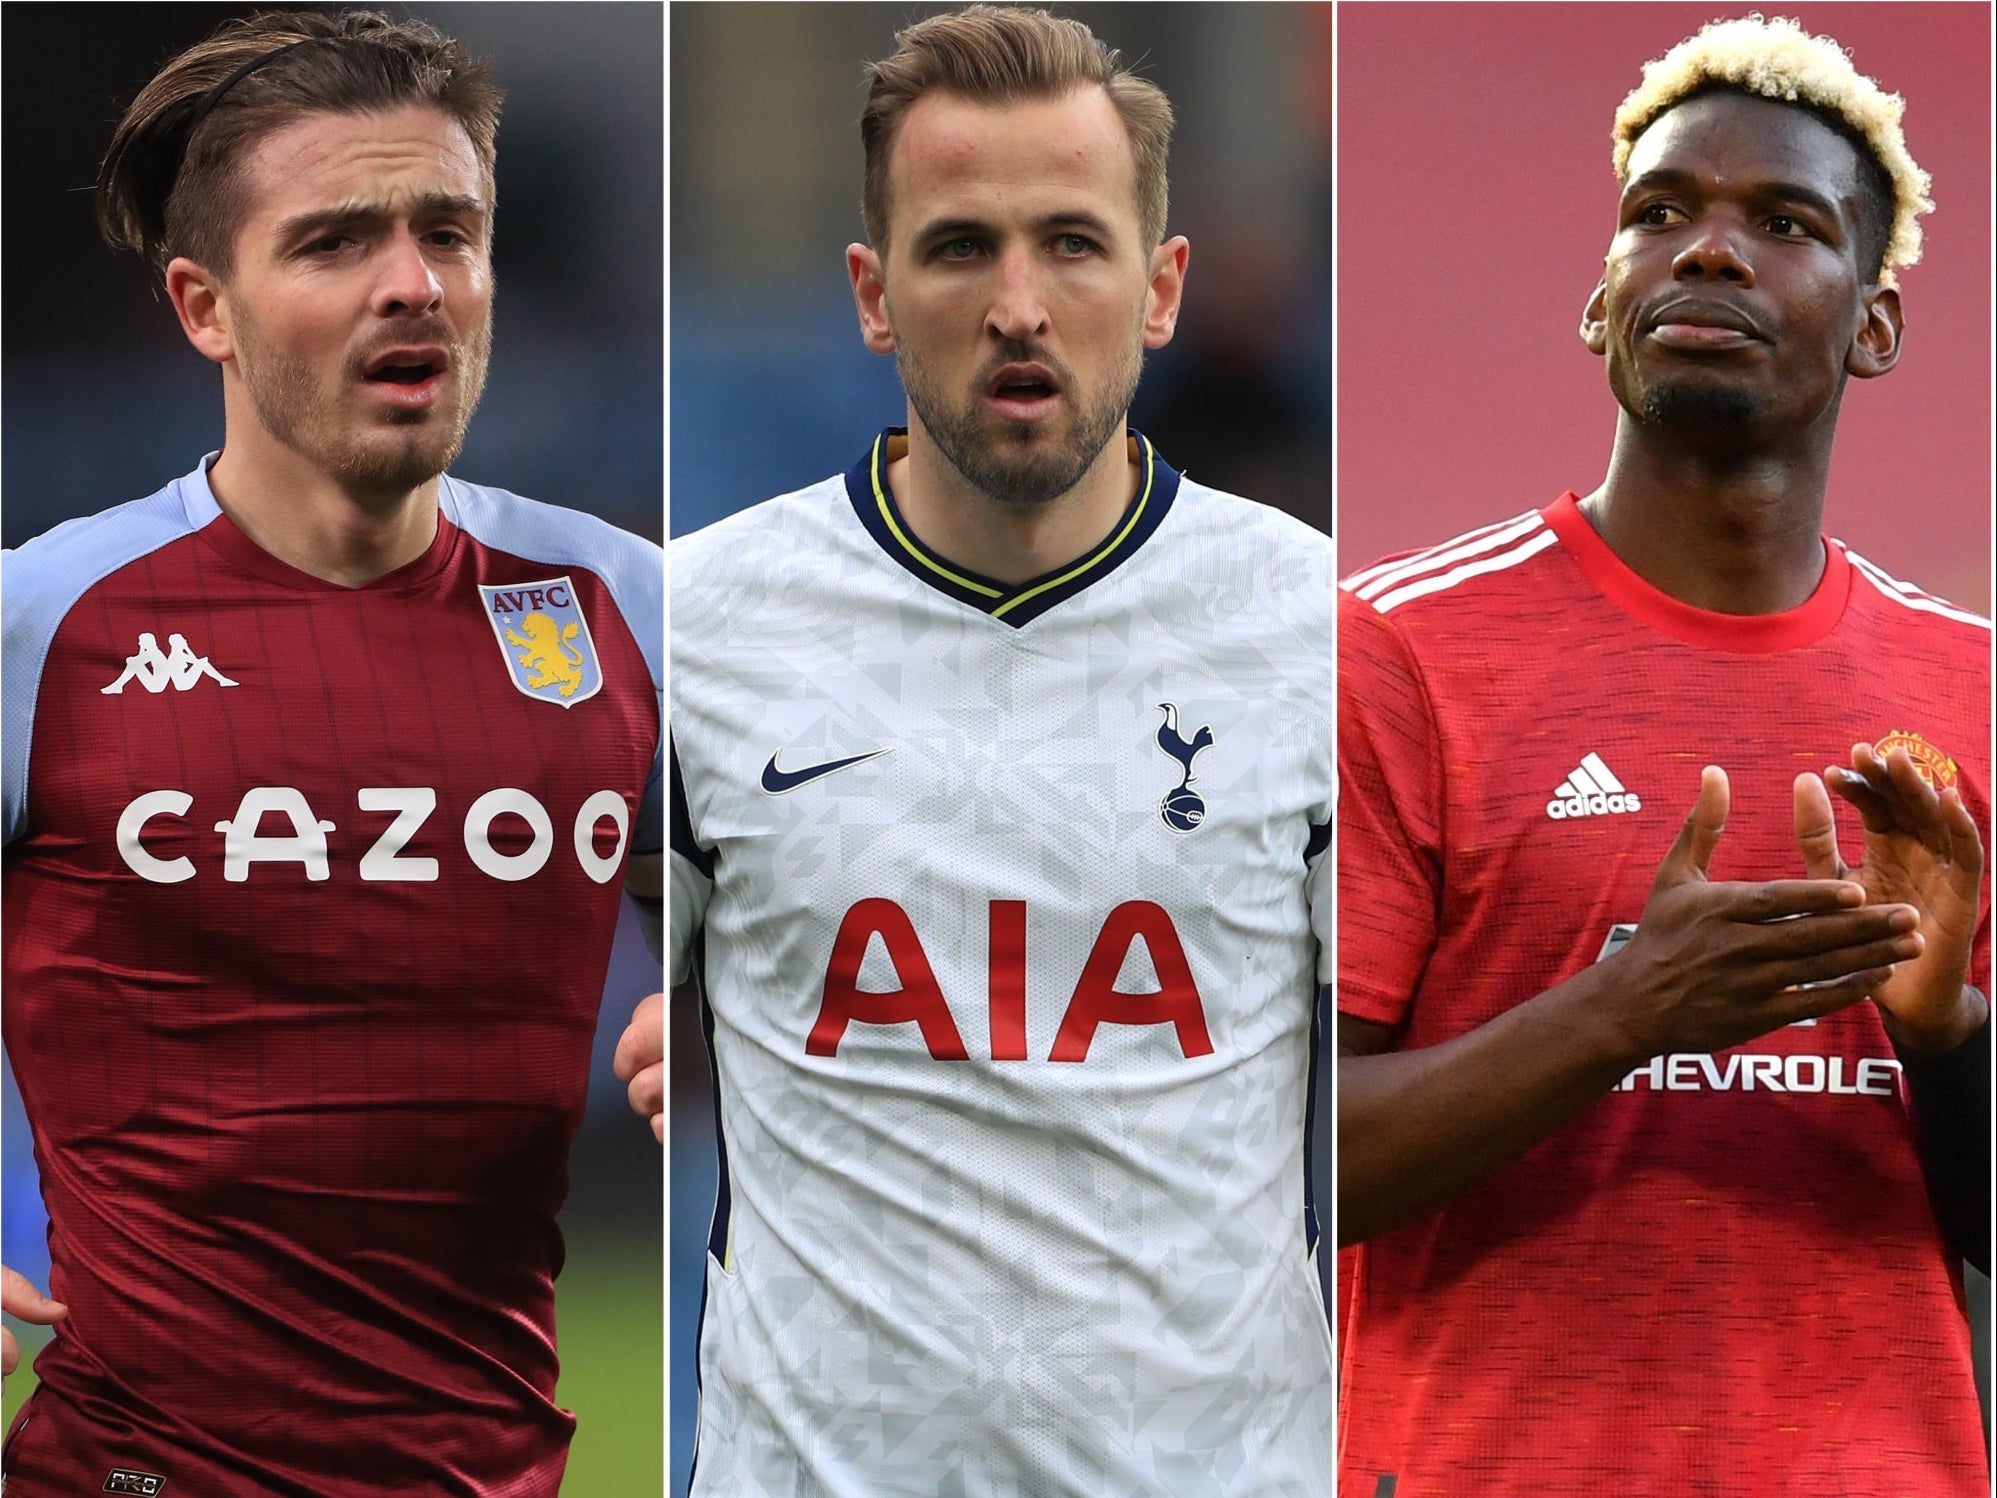 Aston Villa captain Jack Grealish, left, Tottenham striker Harry Kane, centre, and Manchester United midfielder Paul Pogba, right, could be on the move this summer